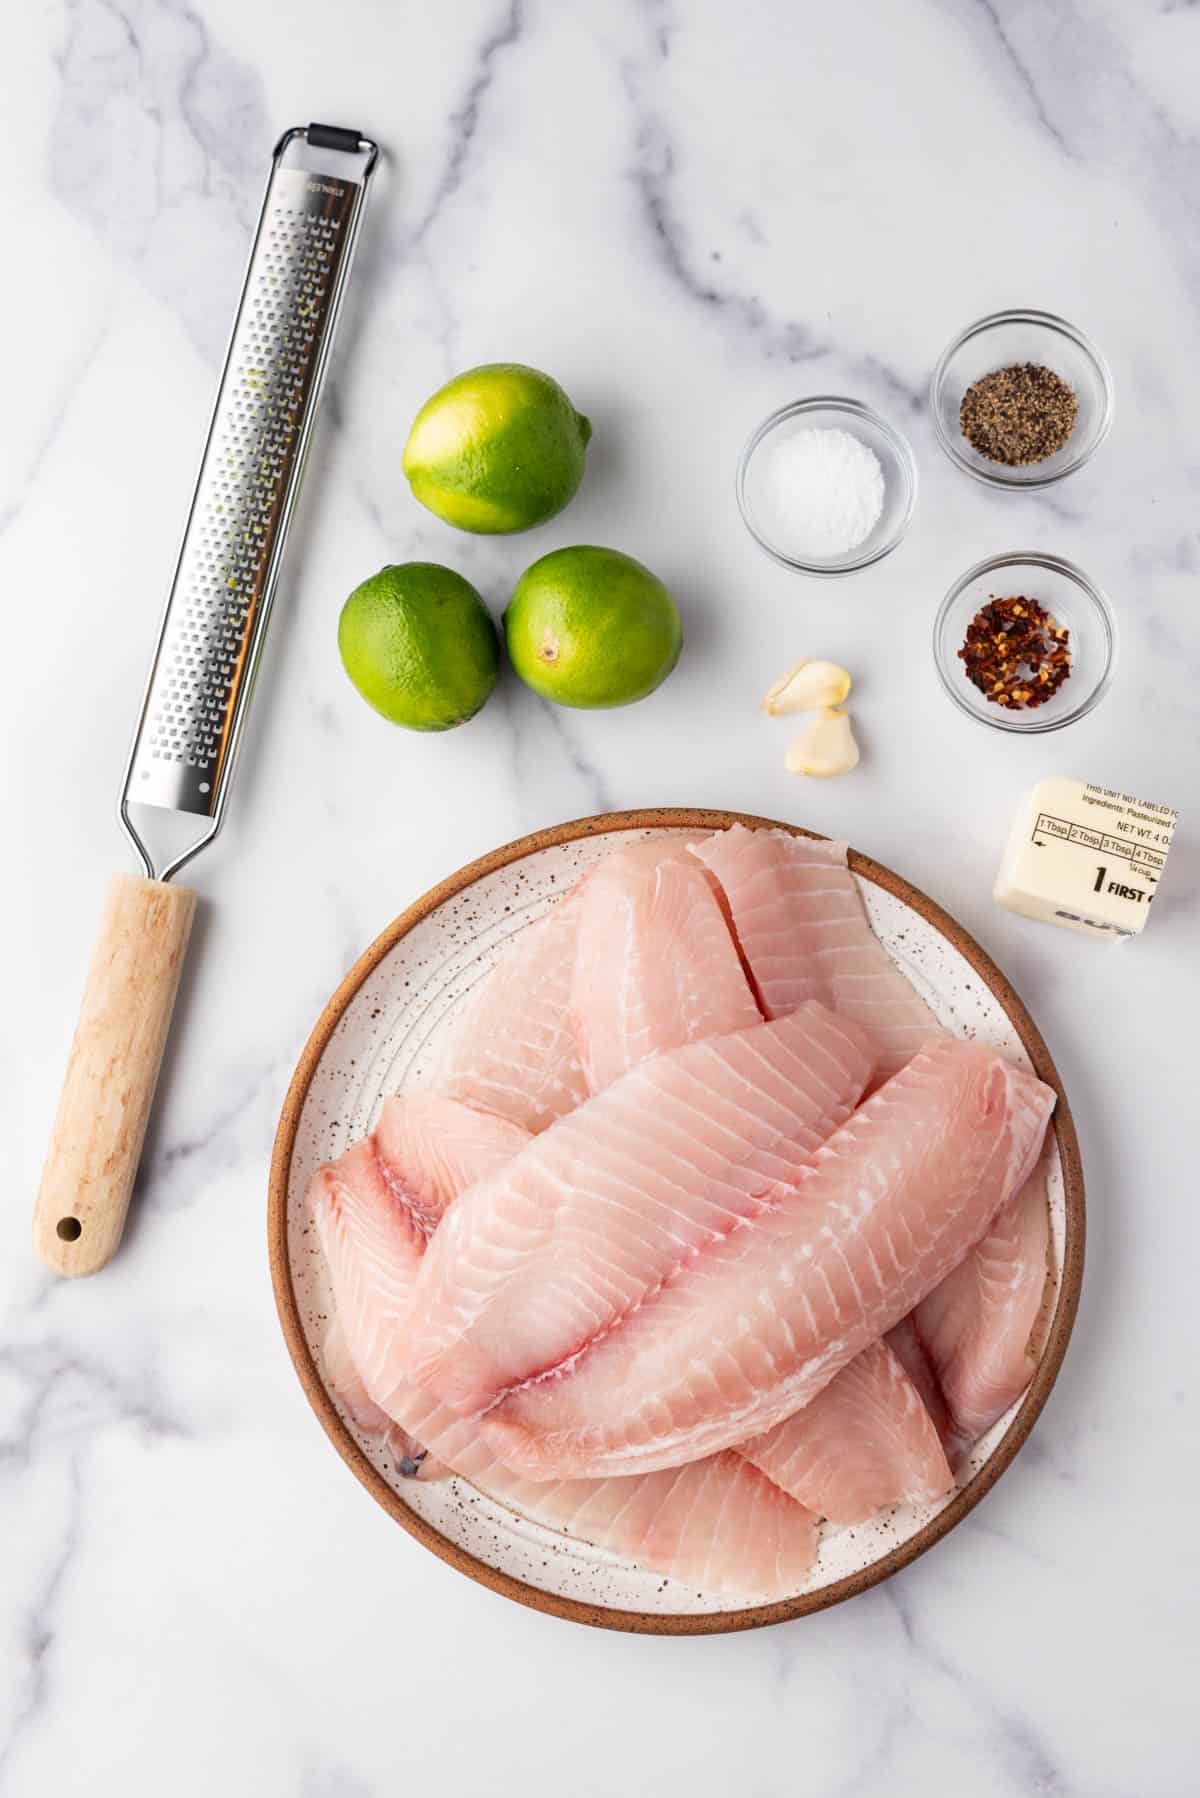 An image of the ingredients for baked tilapia.